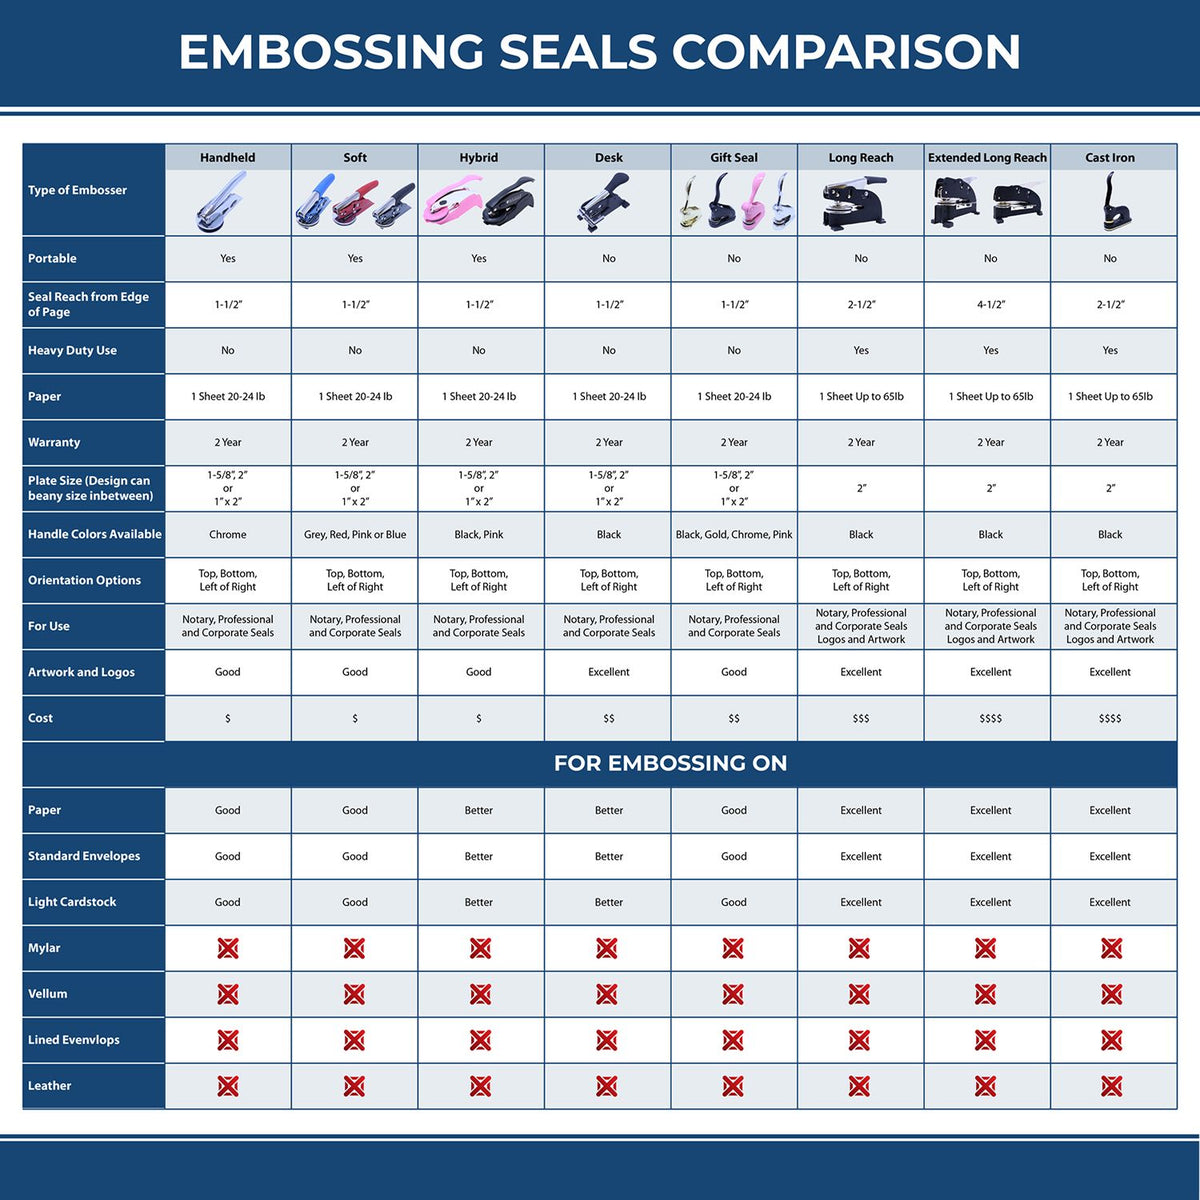 A comparison chart for the different types of mount models available for the Heavy Duty Cast Iron Florida Architect Embosser.